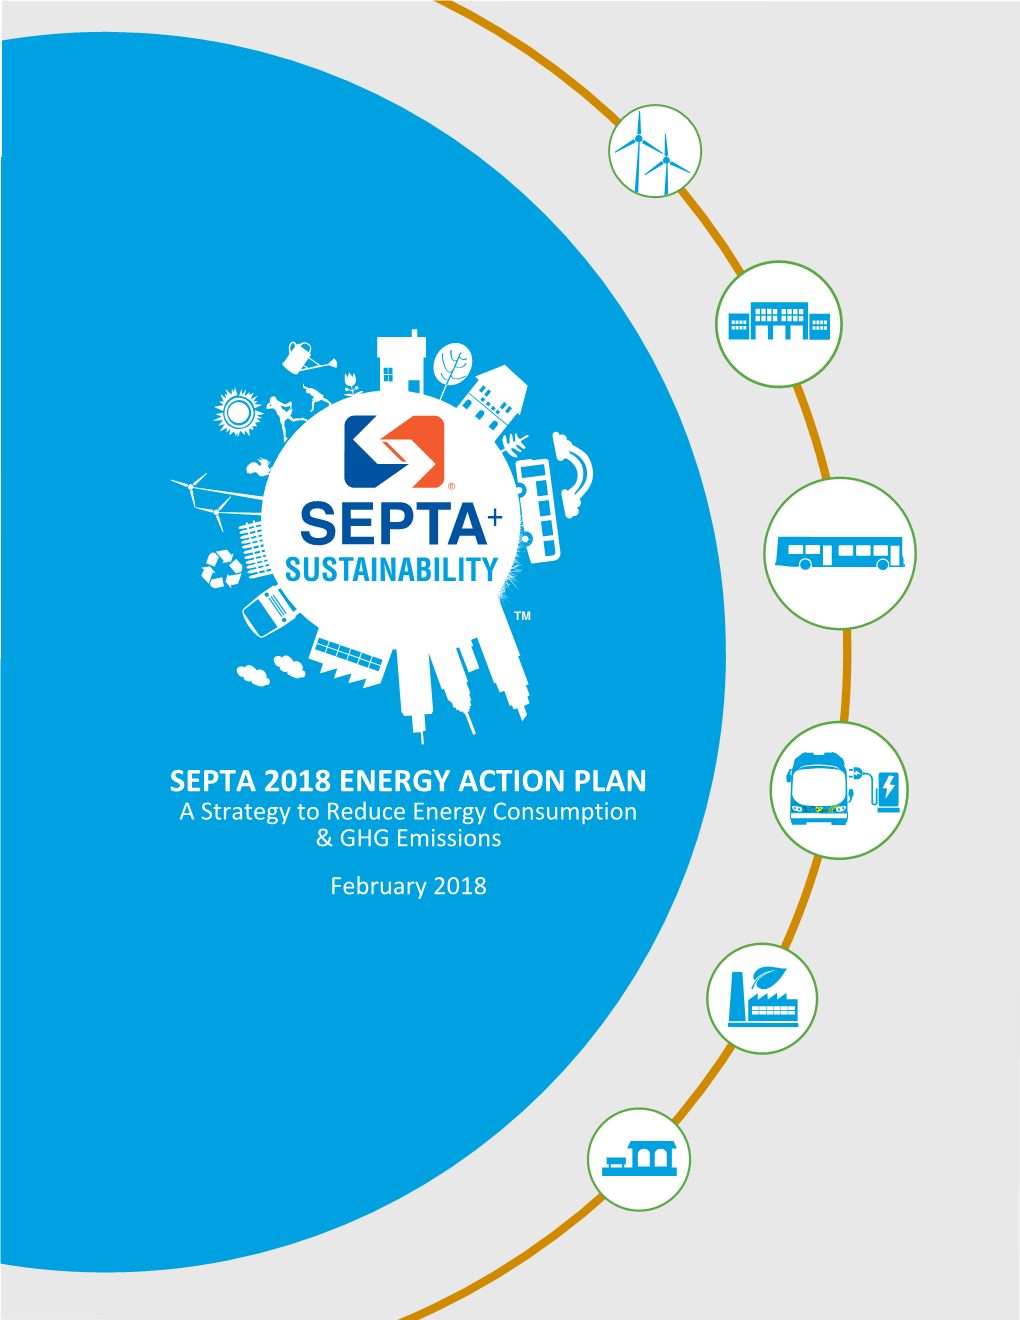 SEPTA 2018 ENERGY ACTION PLAN a Strategy to Reduce Energy Consumption & GHG Emissions February 2018